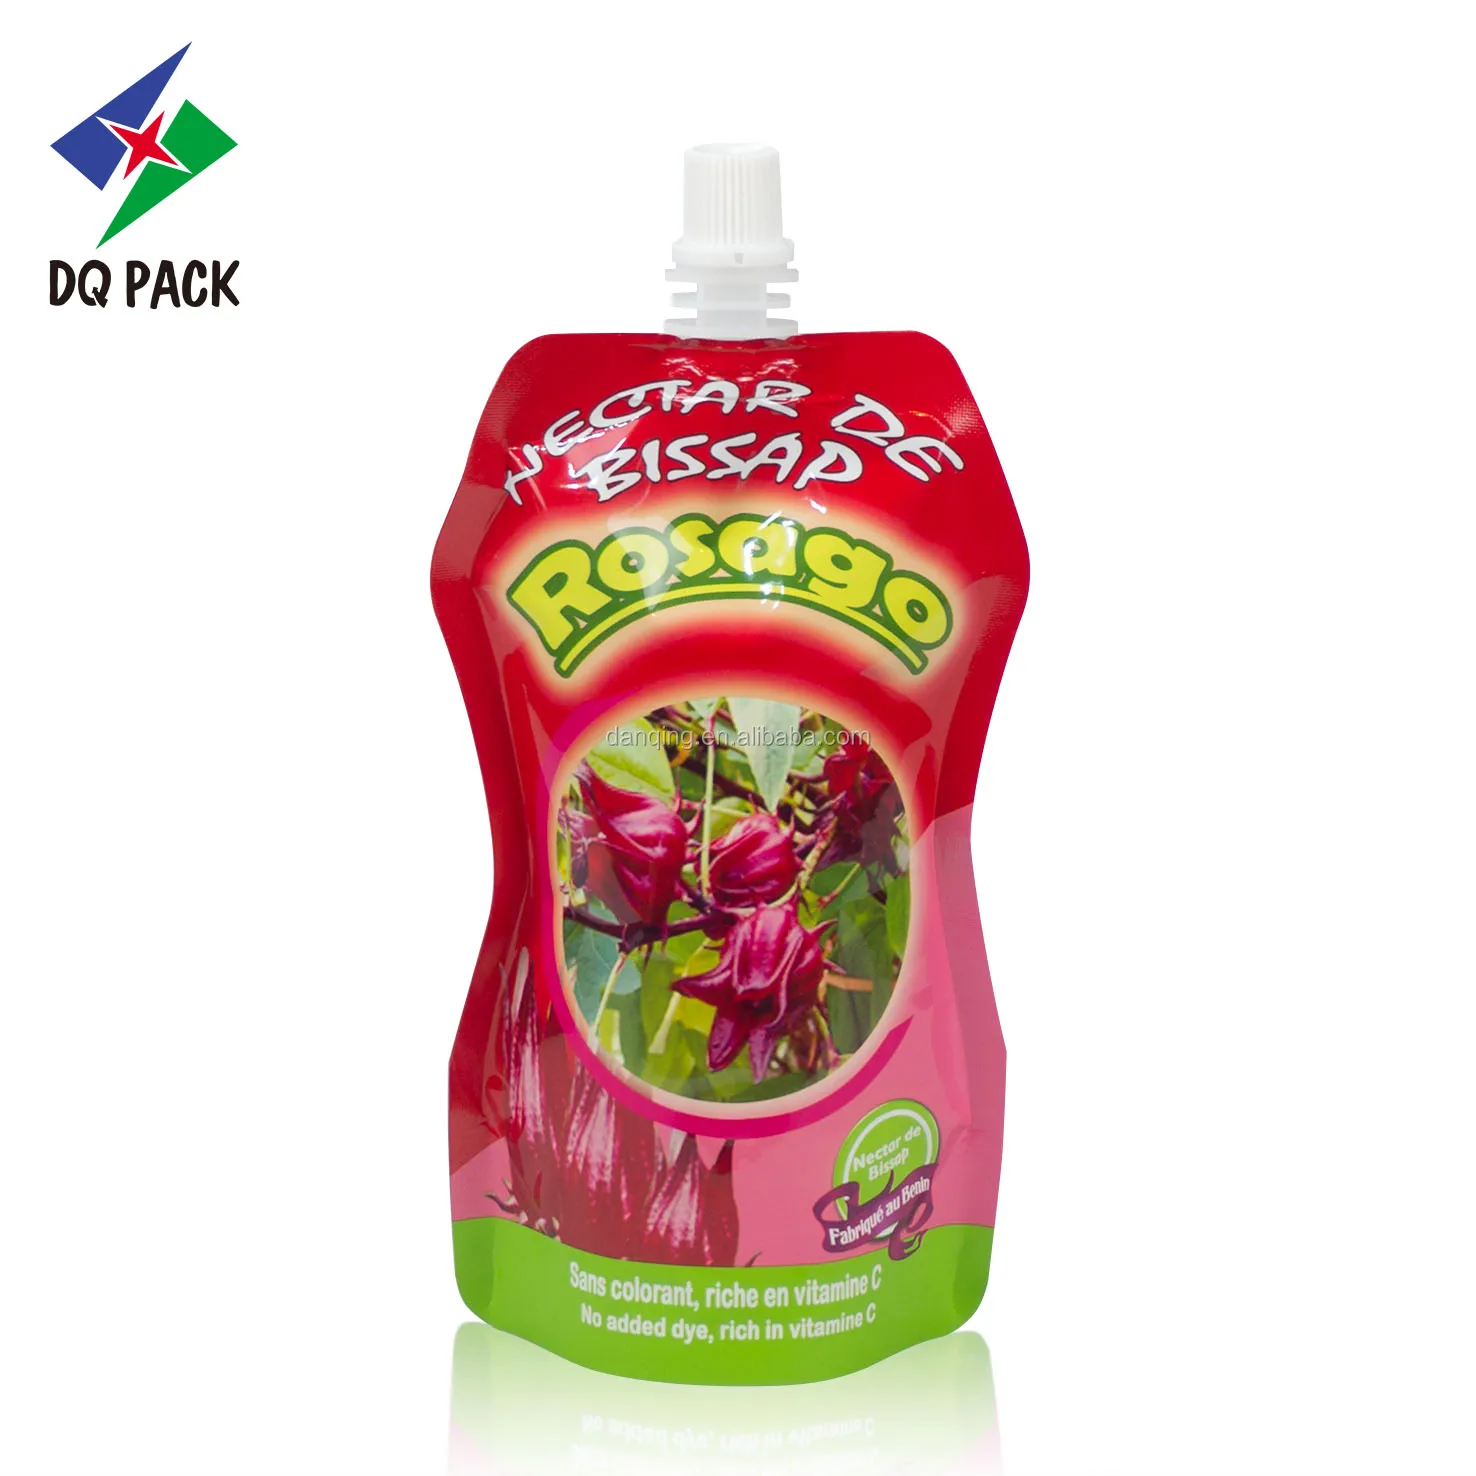 DQ PACK New Plastic 200ml Drink Packaging Bag Spout Pouch